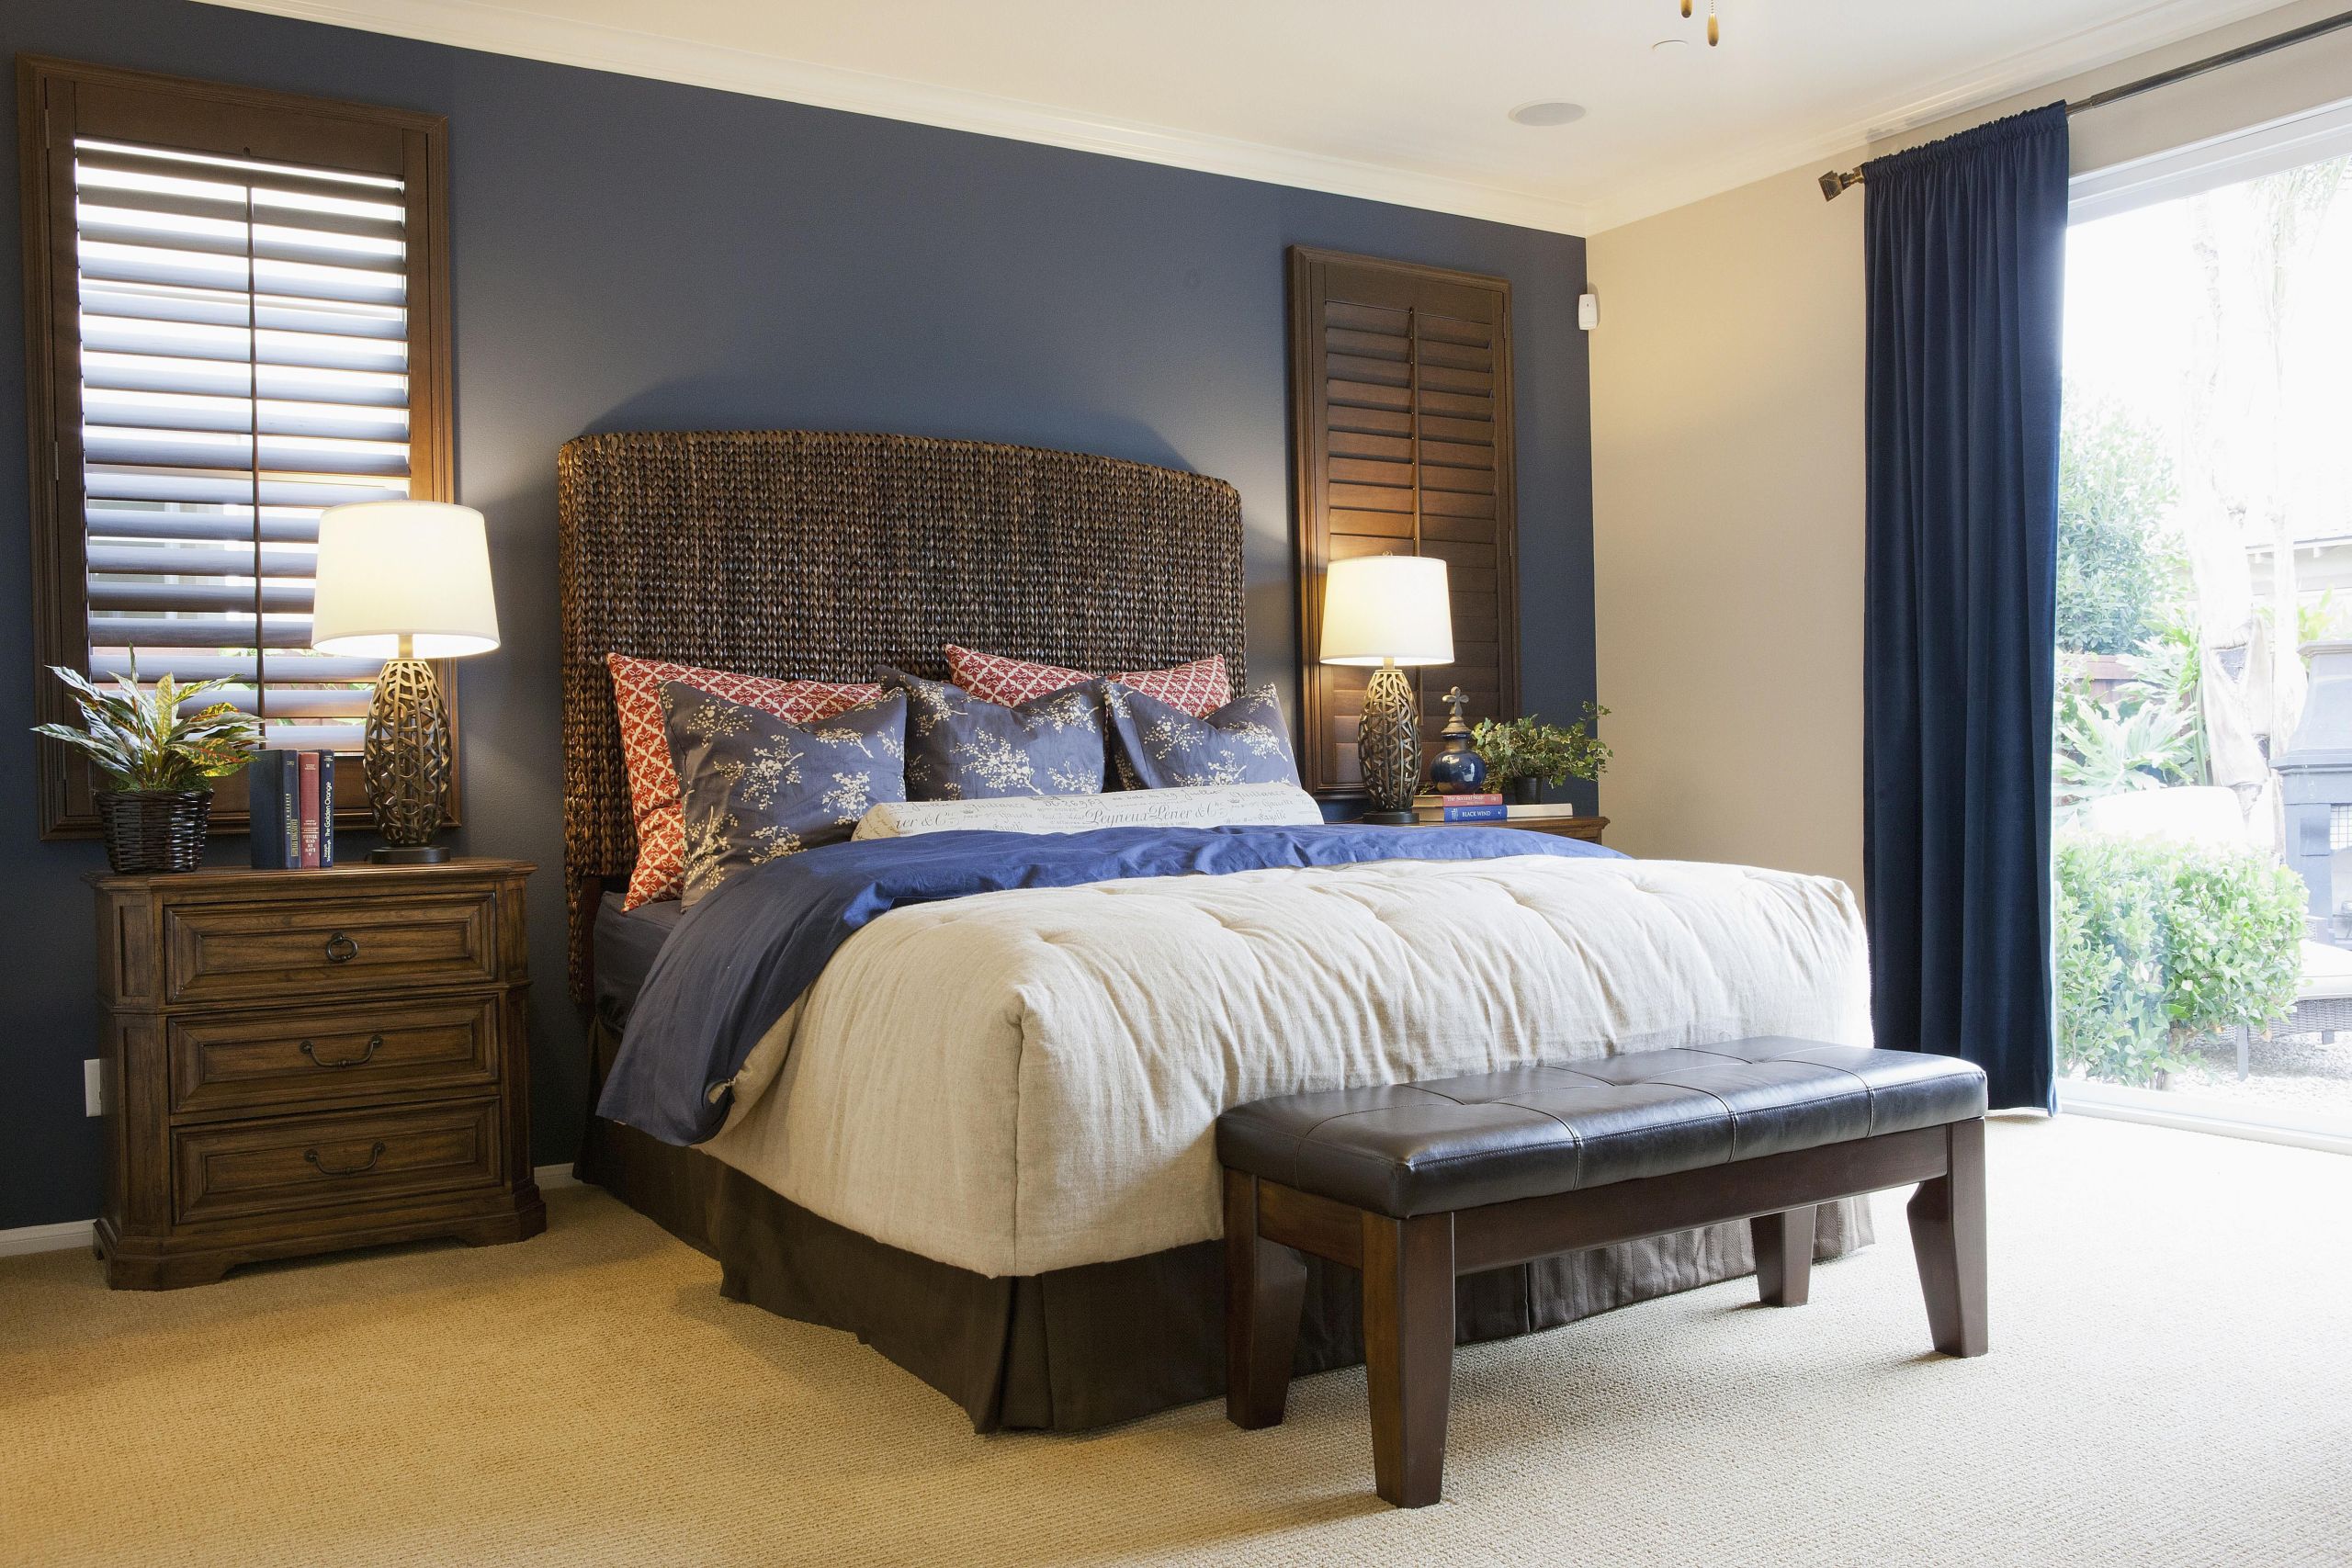 Bedroom Accent Wall Colors
 How to Choose a Bedroom Accent Wall and Color